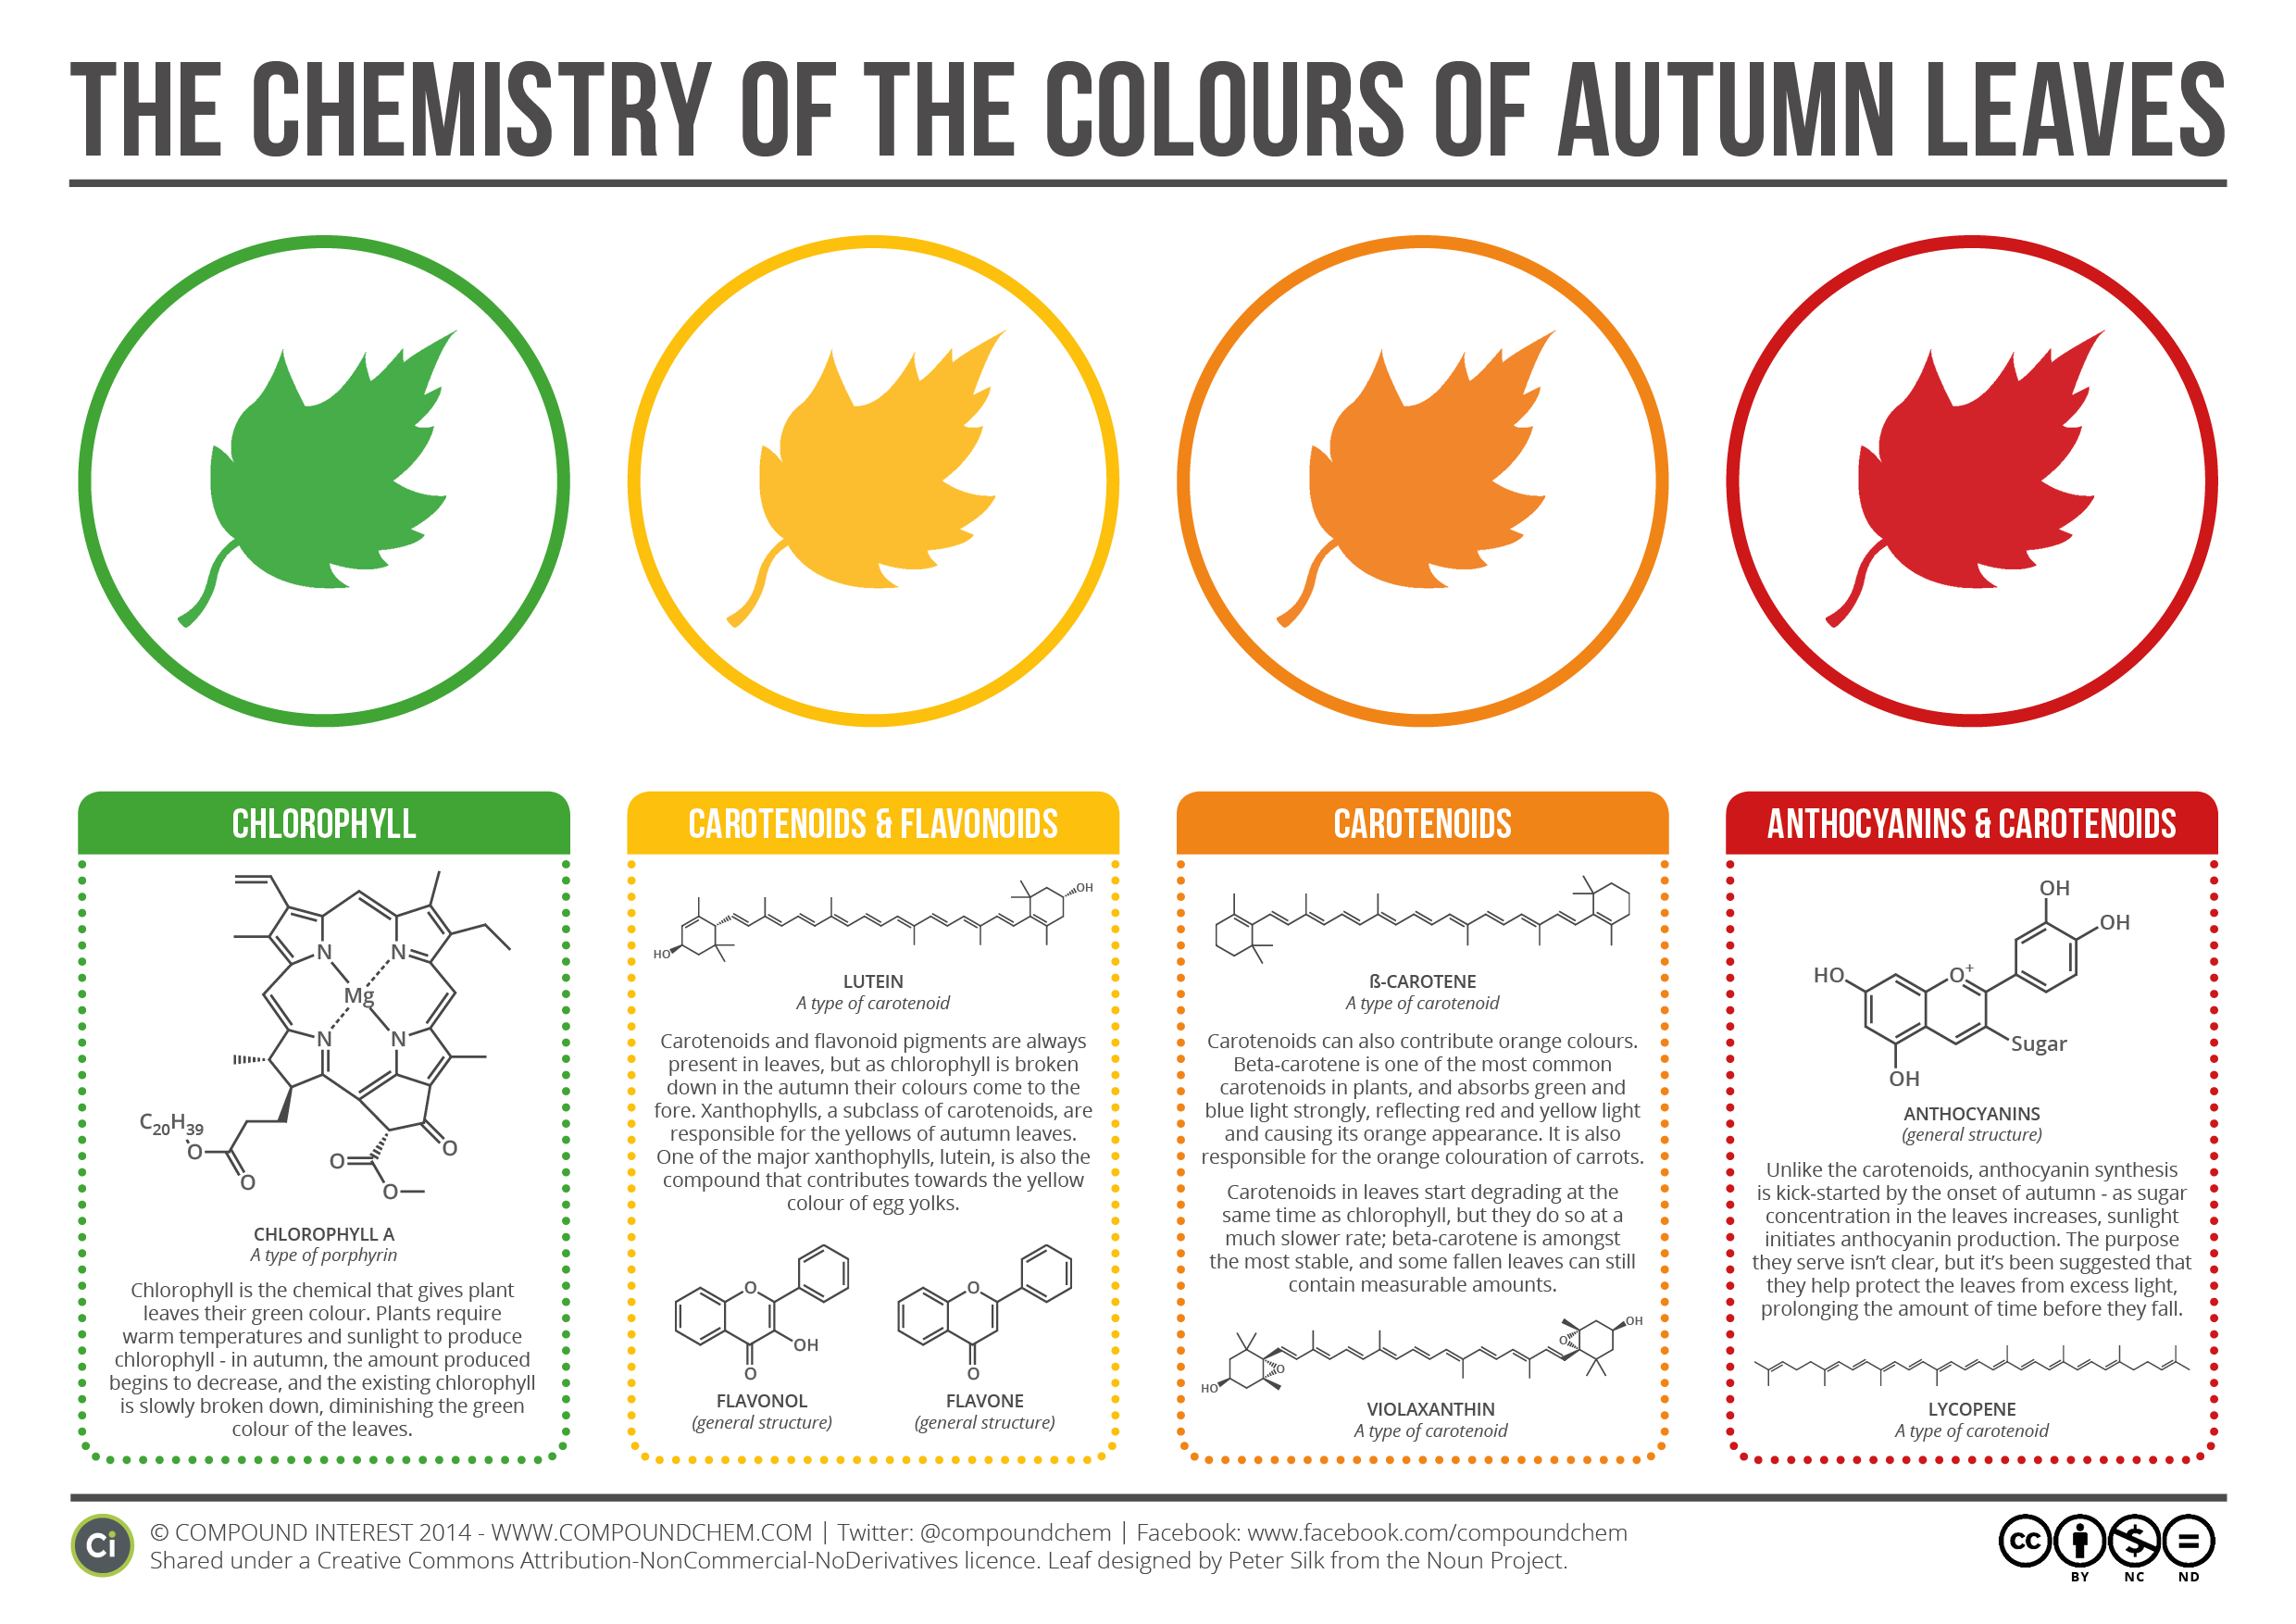 A Helpful Chart That Explains the Chemicals That Give Autumn Leaves